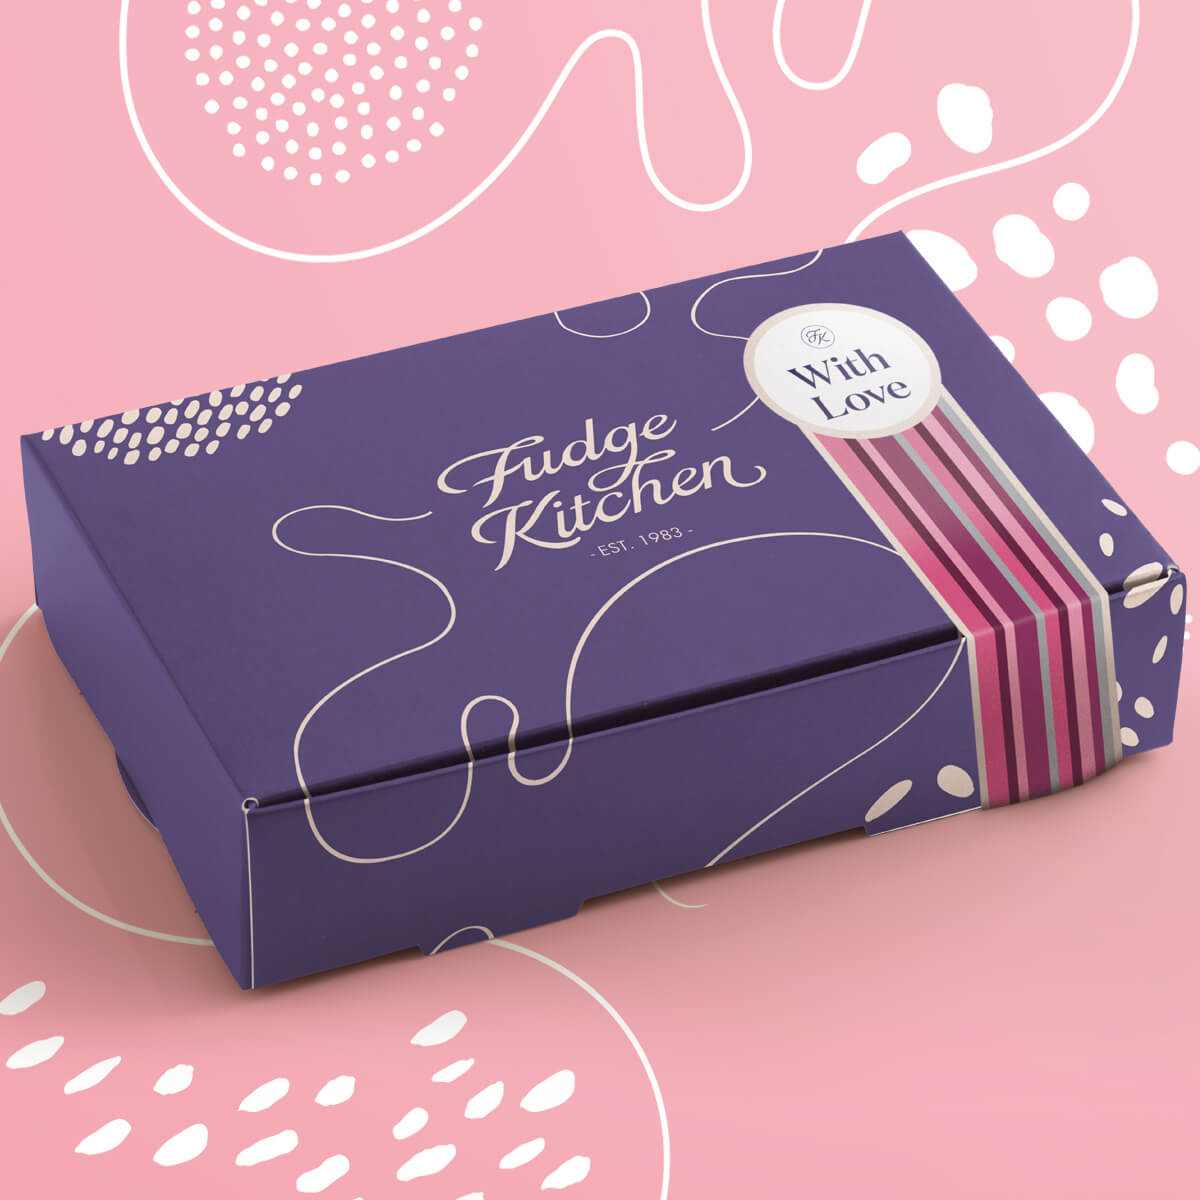 Butter fudge gift box with a 'With Love' band